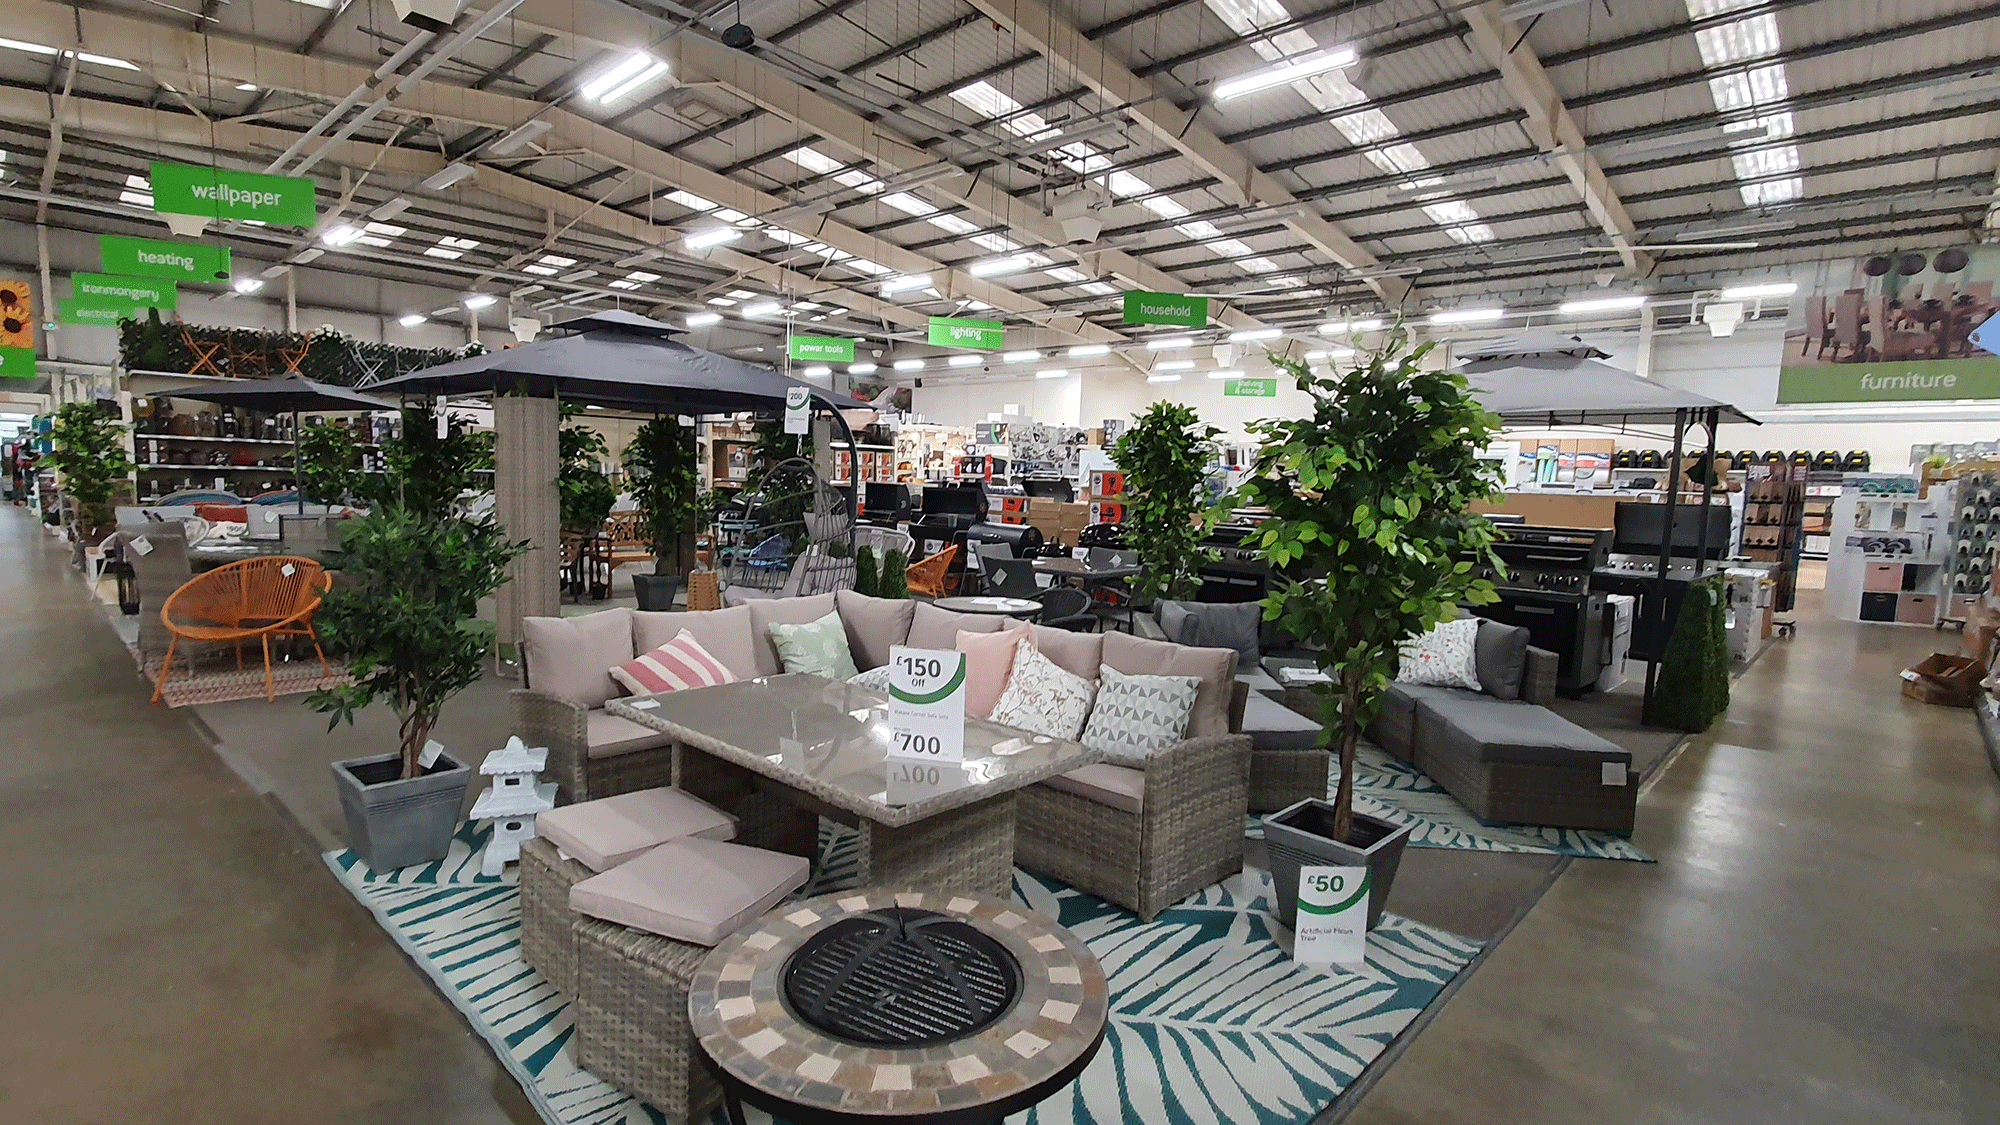 See this year garden furniture displayed in our store Homebase - Northampton Northampton 03456 407102